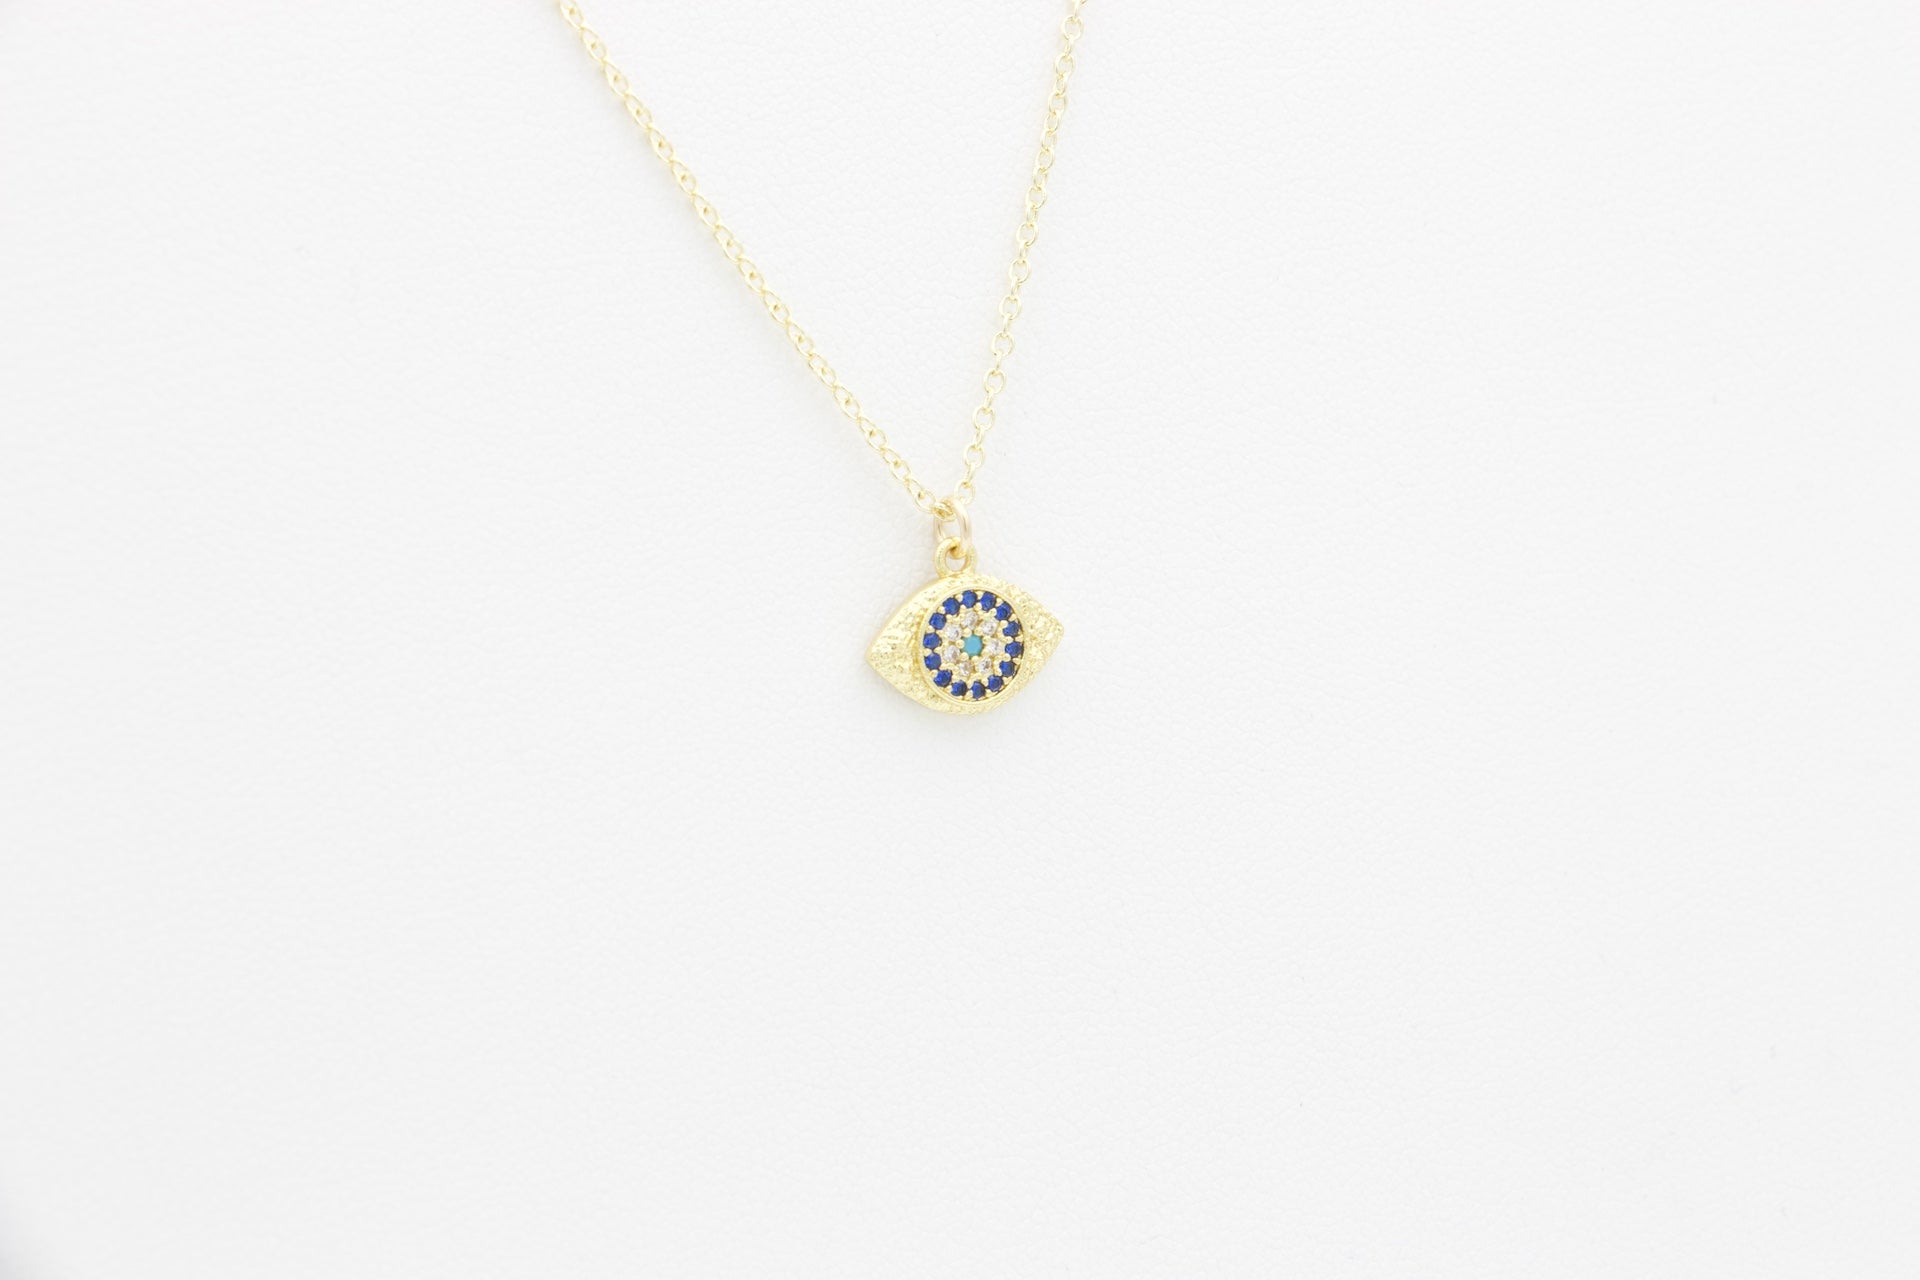 AW Boutique gold filled jewellery.  Evil Eye pendant charm on a dainty fine cable necklace chain.  Part of the Protection collection.